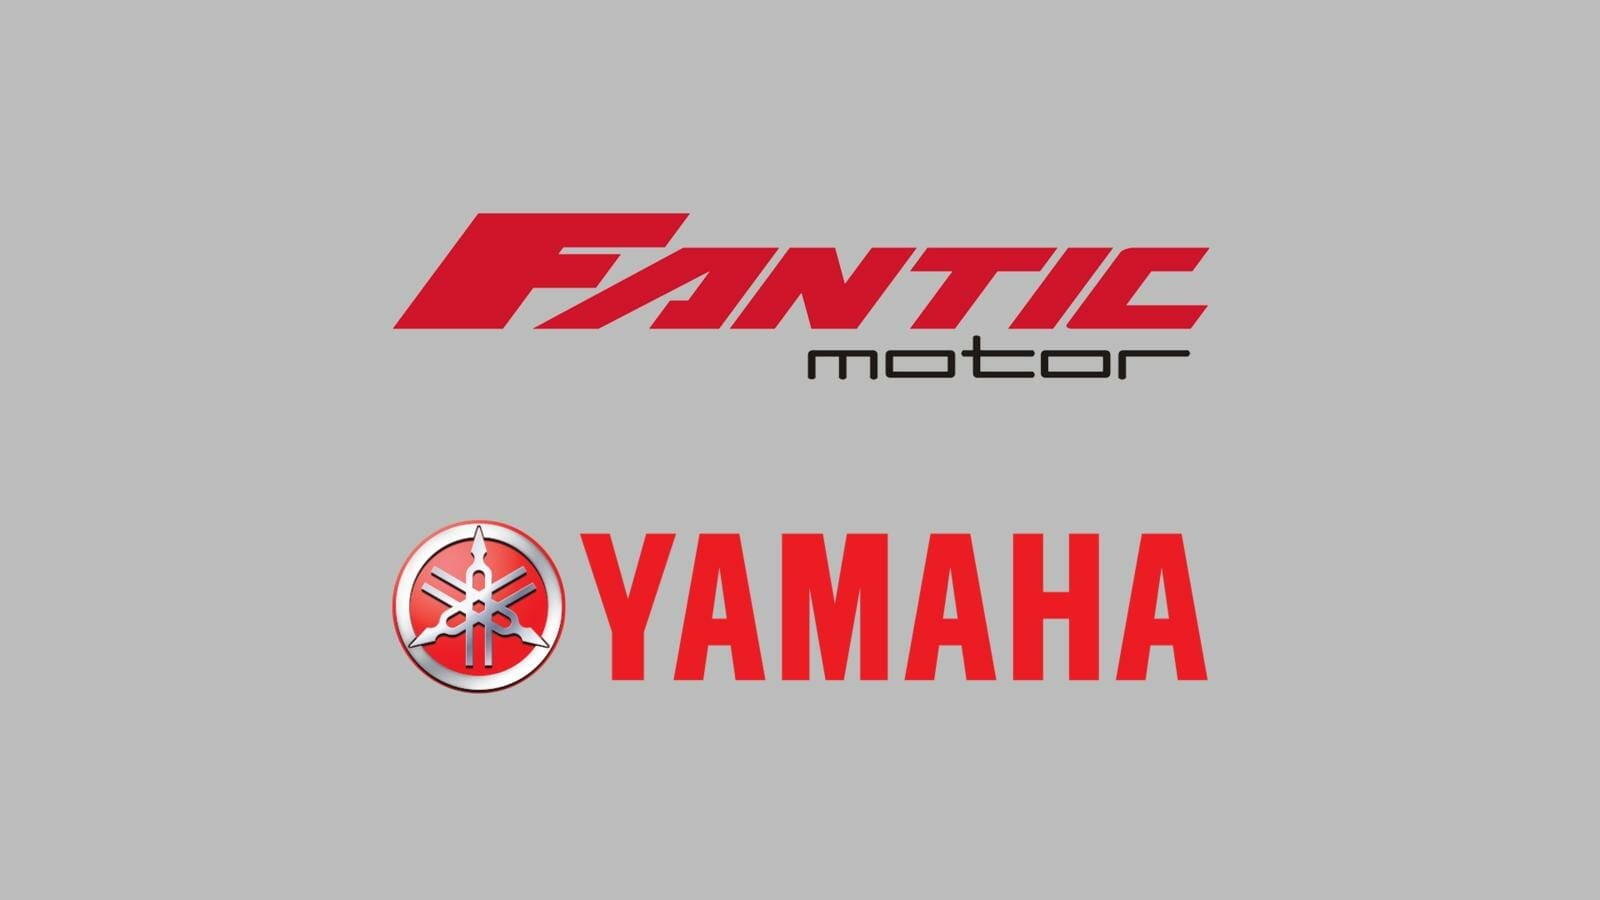 Yamaha Motor Europe and Fantic Motor strengthen partnership
- also in the App MOTORCYCLE NEWS